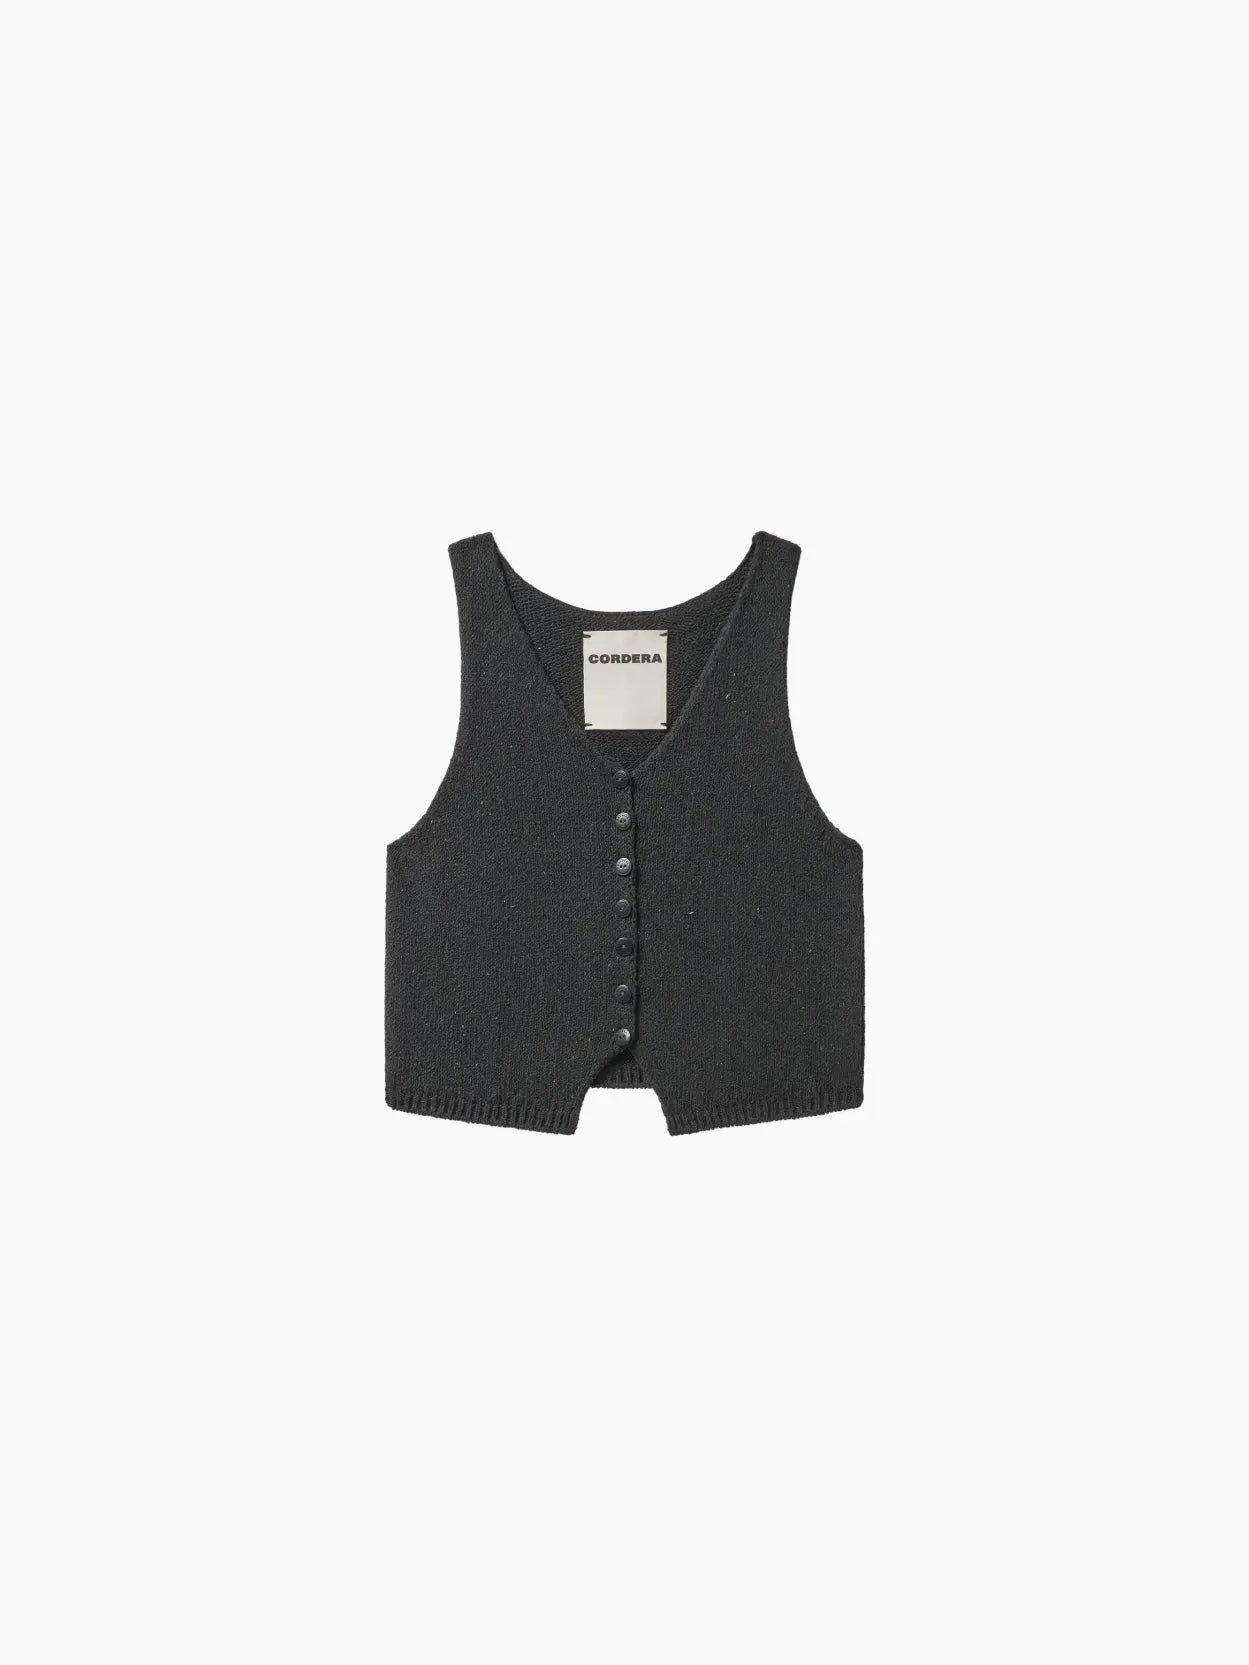 A Heather Cotton Waistcoat Charcoal from Cordera. The waistcoat has a V-neckline and is neatly tailored. Inside, there is a small beige label with "Cordera" written on it. The waistcoat lies flat against a plain white background.